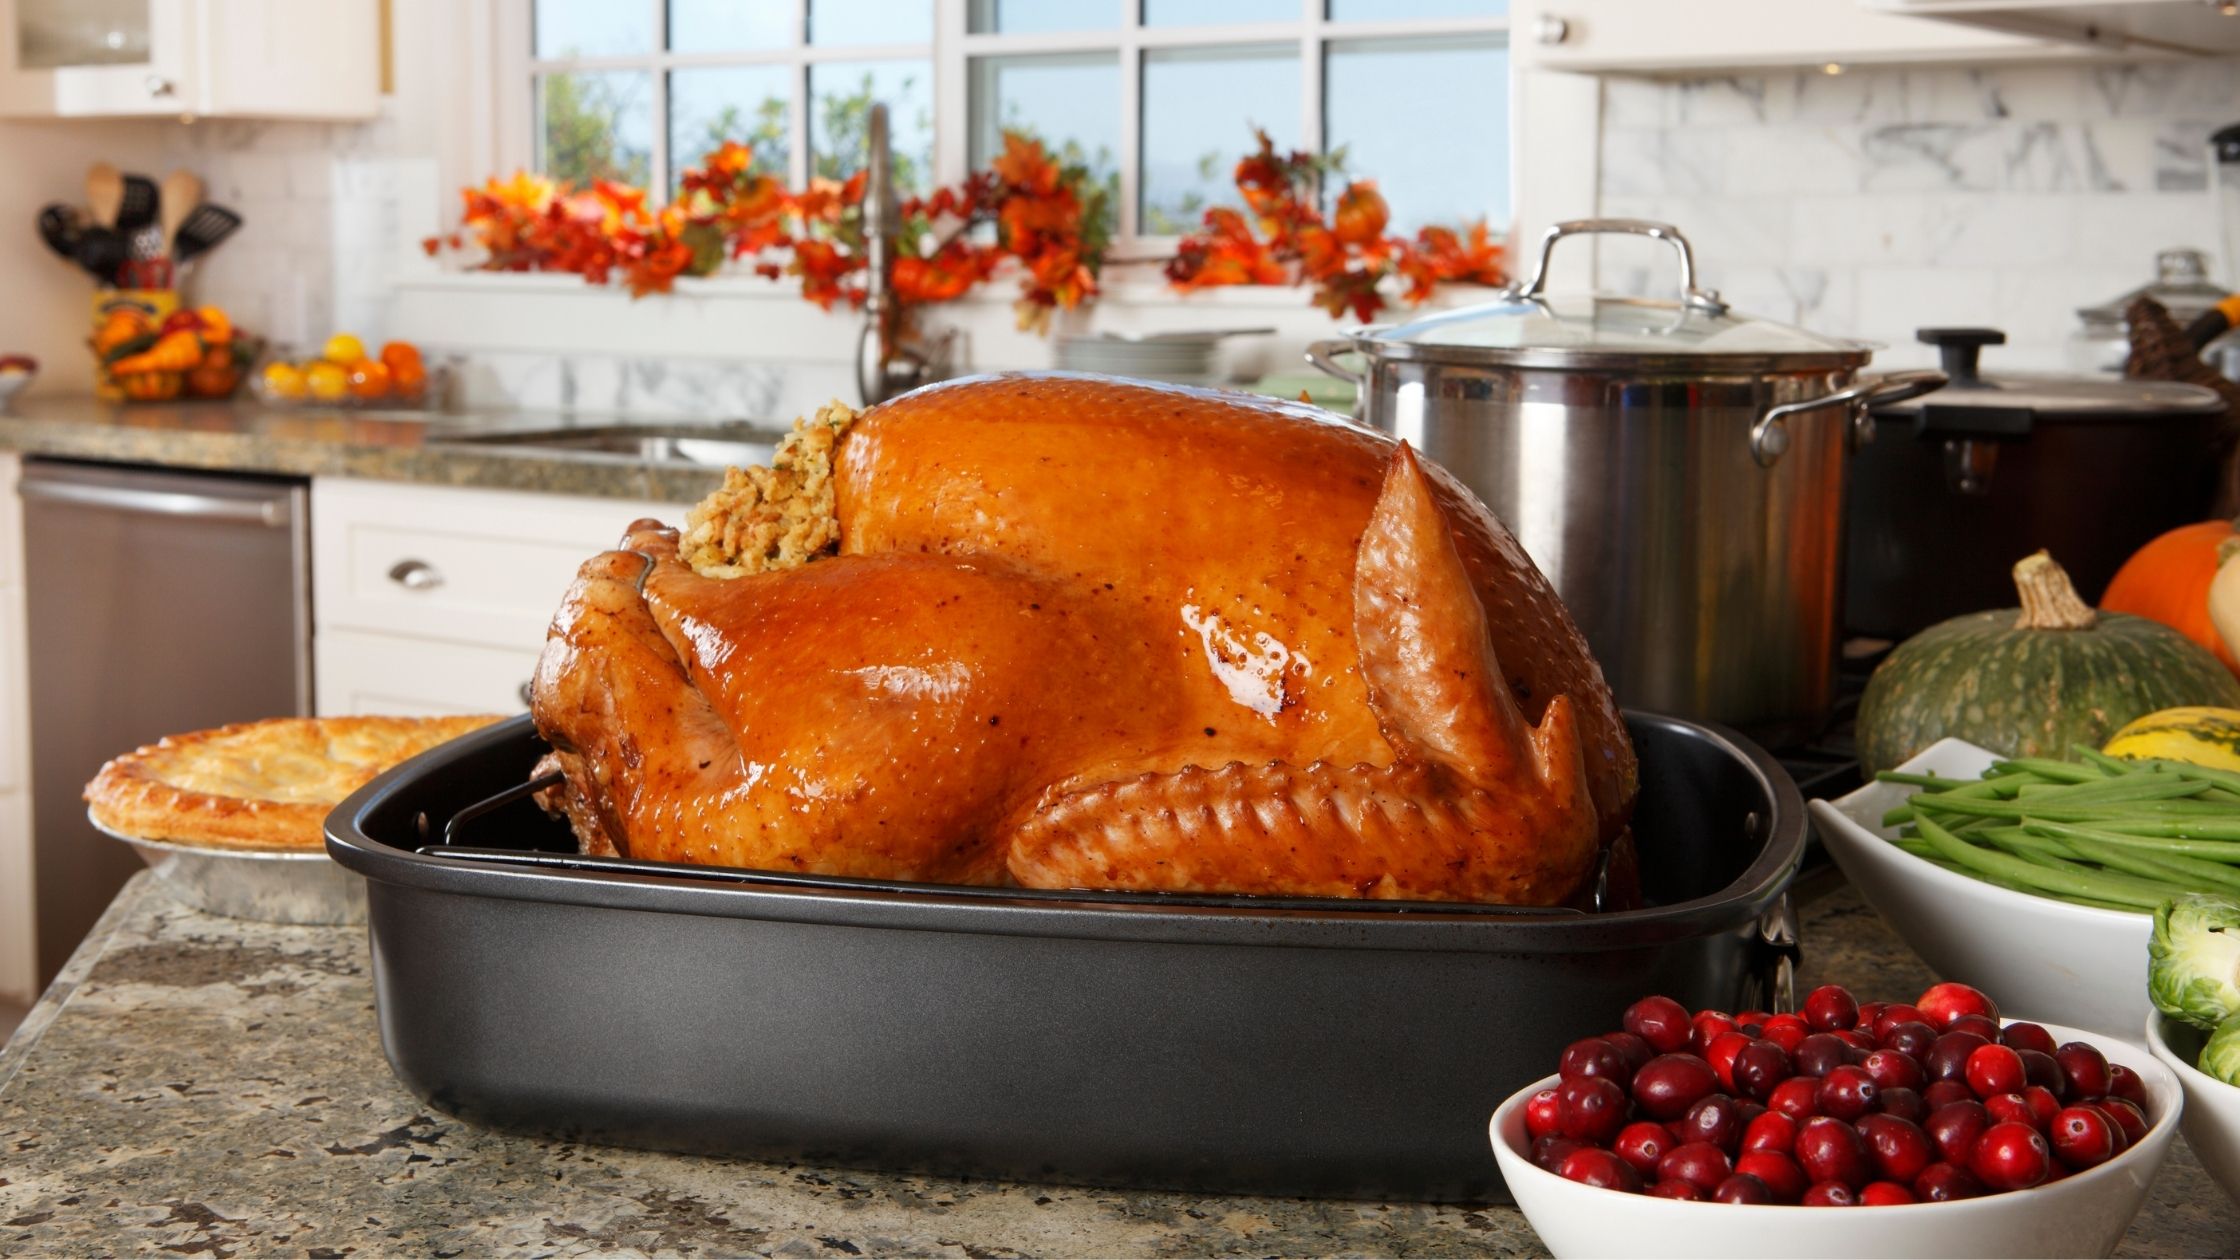 Cooking This Thanksgiving? Make Sure Your Homeowners' Insurance Covers Turkey Fires!